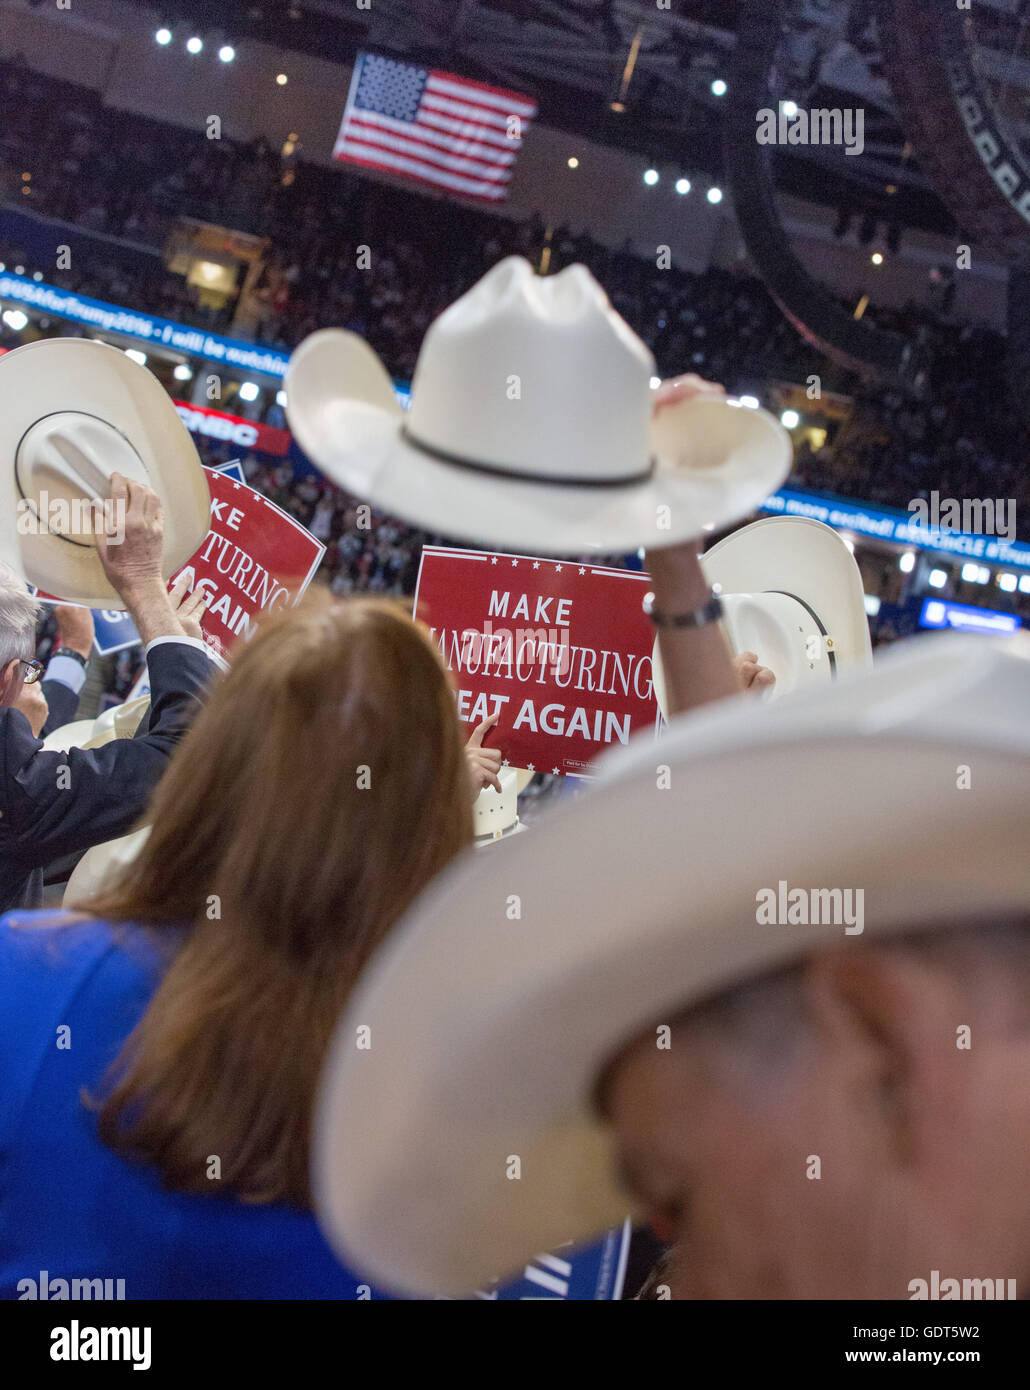 Cleveland, Ohio, USA; July 21, 2016: Texas delegation cheers, fourth and last night at the Republican National Convention. (Philip Scalia/Alamy Live News) Stock Photo